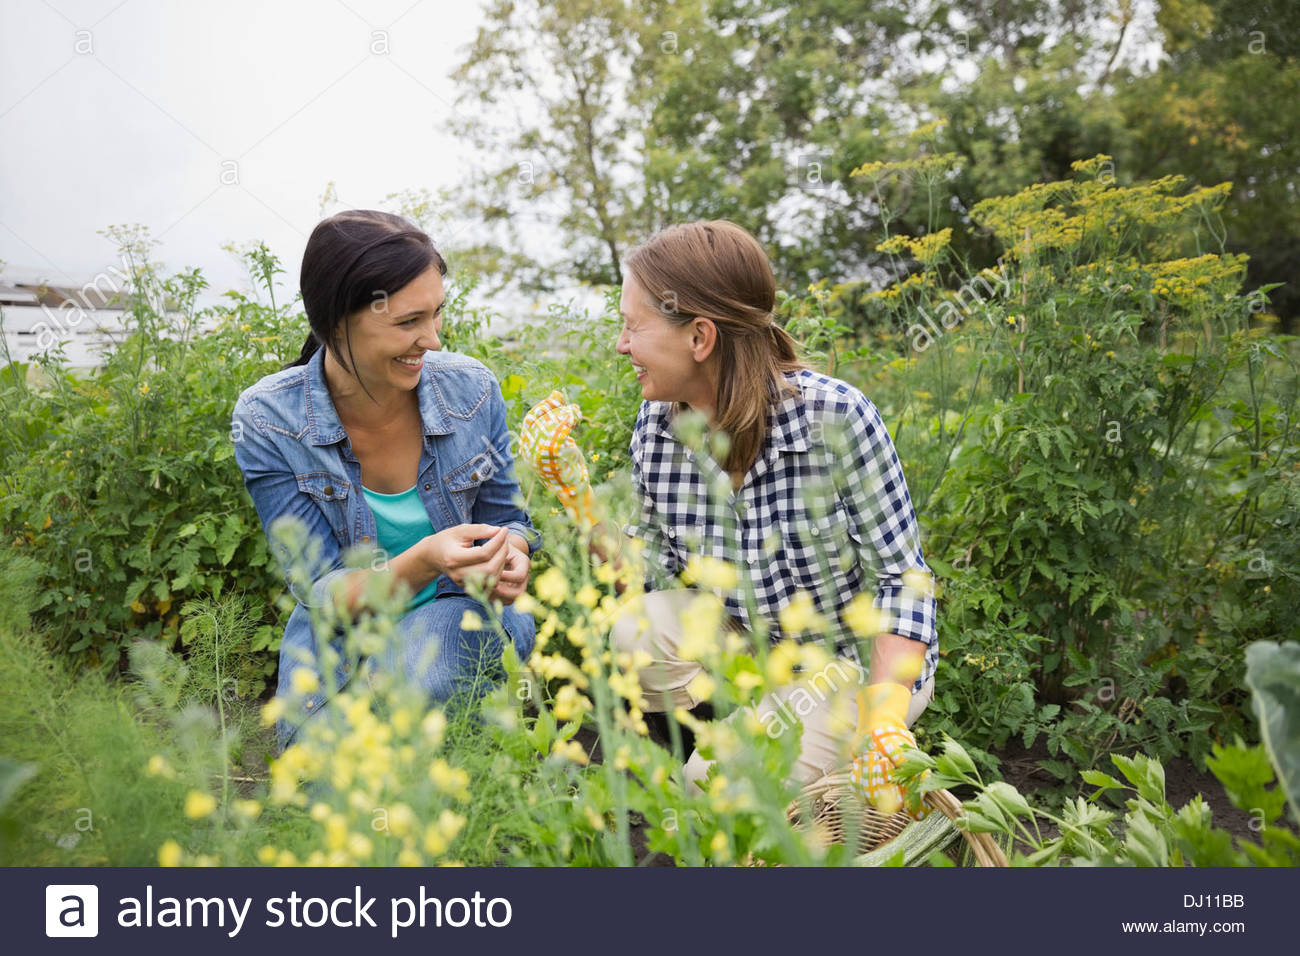 Mother and daughter gardening together Stock Photo